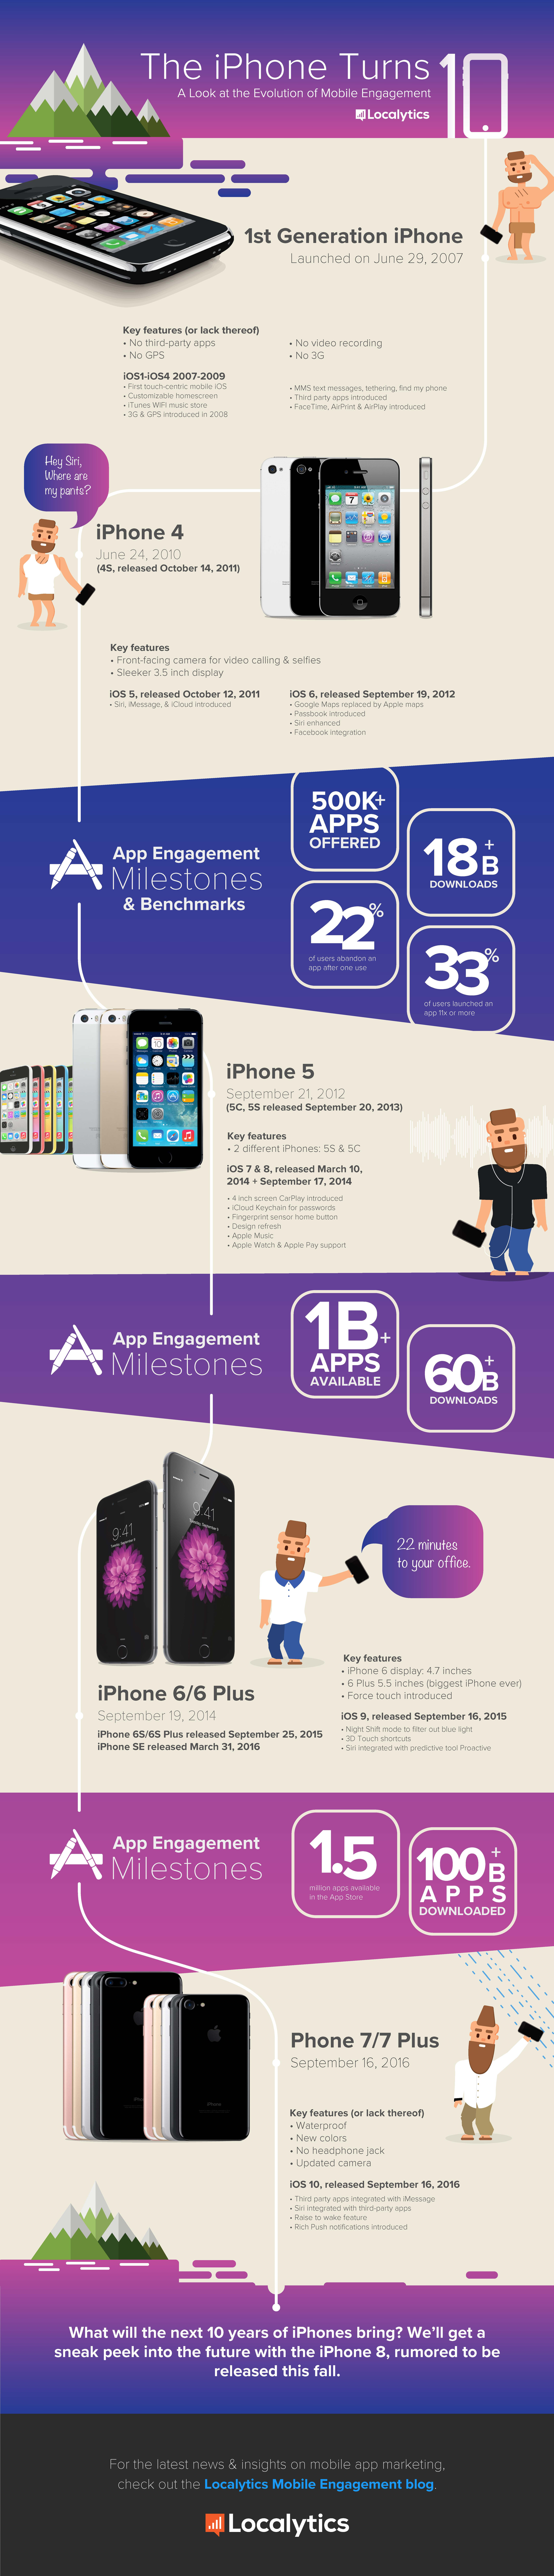 The iPhone Turns 10! How Mobile Engagement Has Evolved Since 2007 [Infographic] | DeviceDaily.com